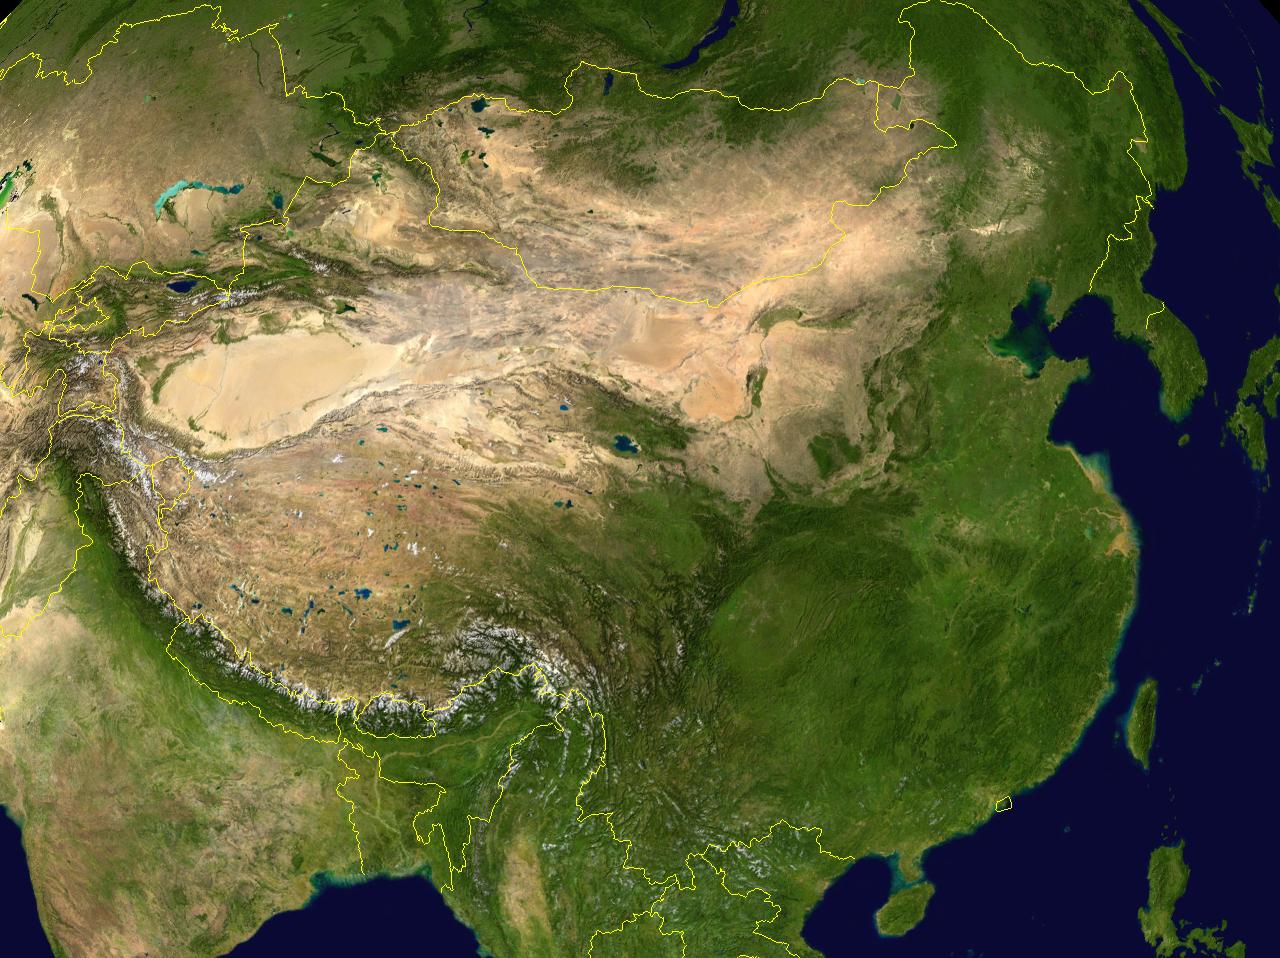 China Planet: Environmental Implications of the Rise of China